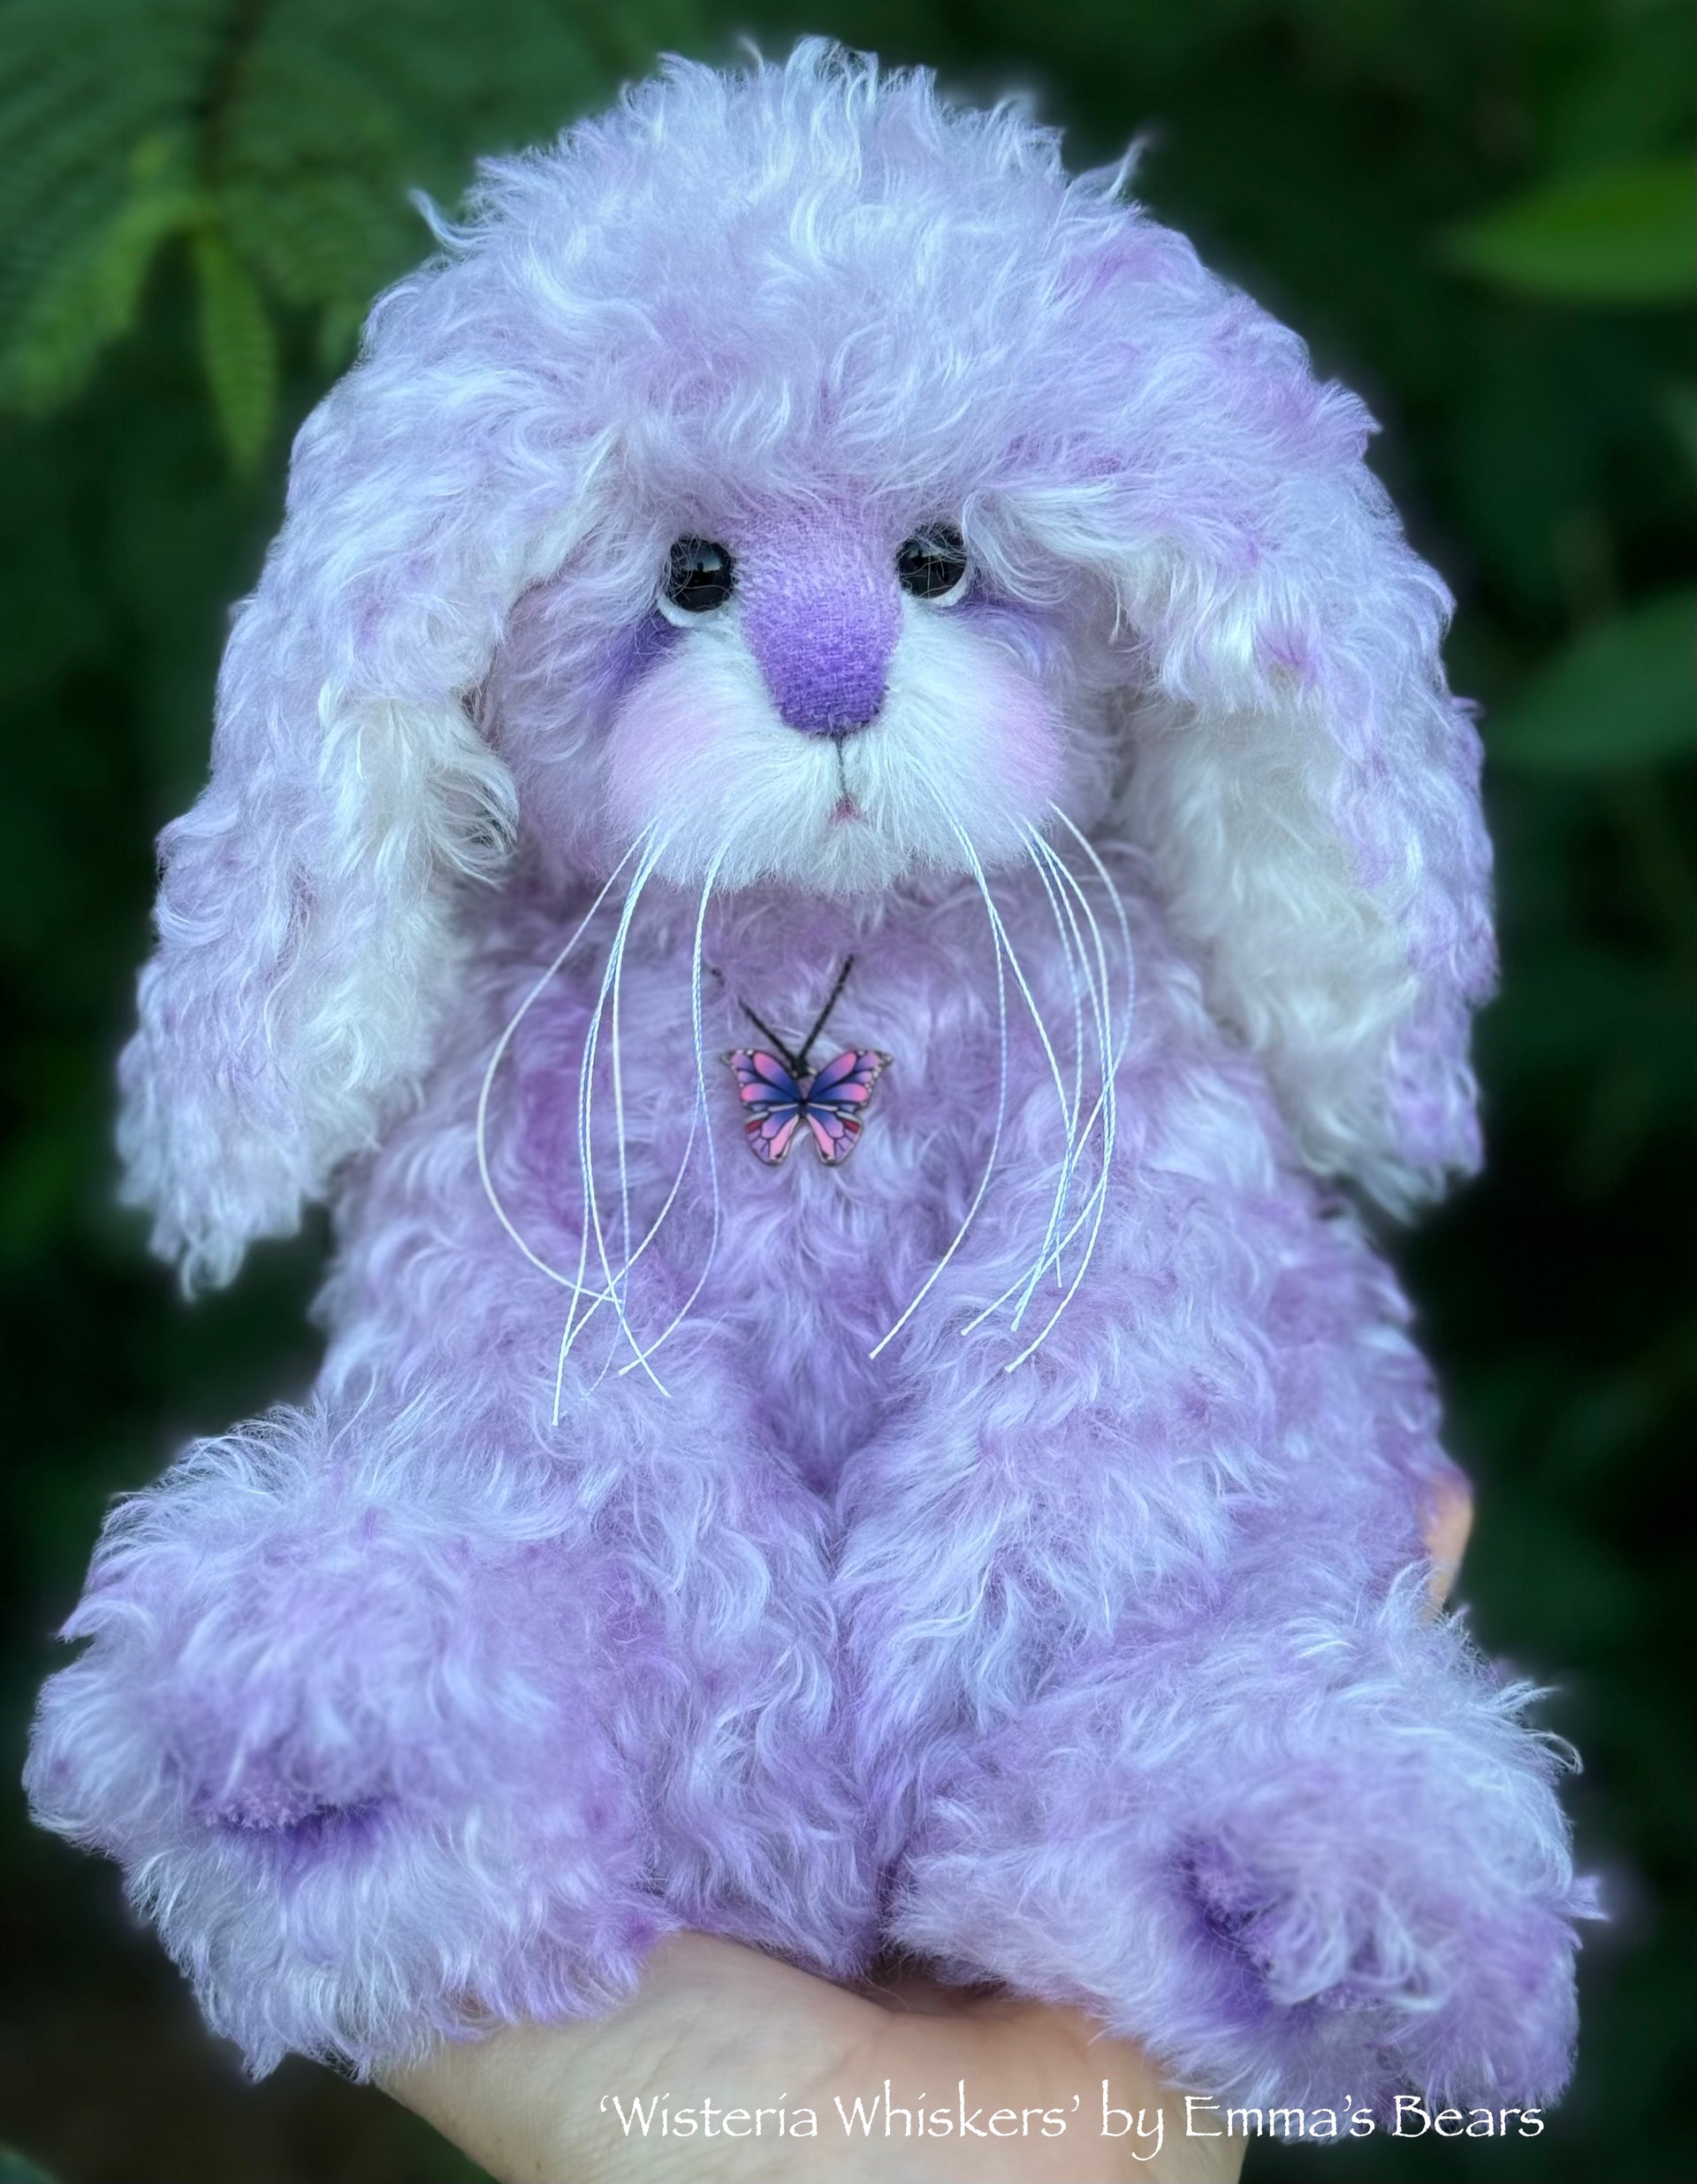 Wisteria Whiskers - 12" Hand-Dyed Kid Mohair EASTER Bunny by Emma's Bears - OOAK